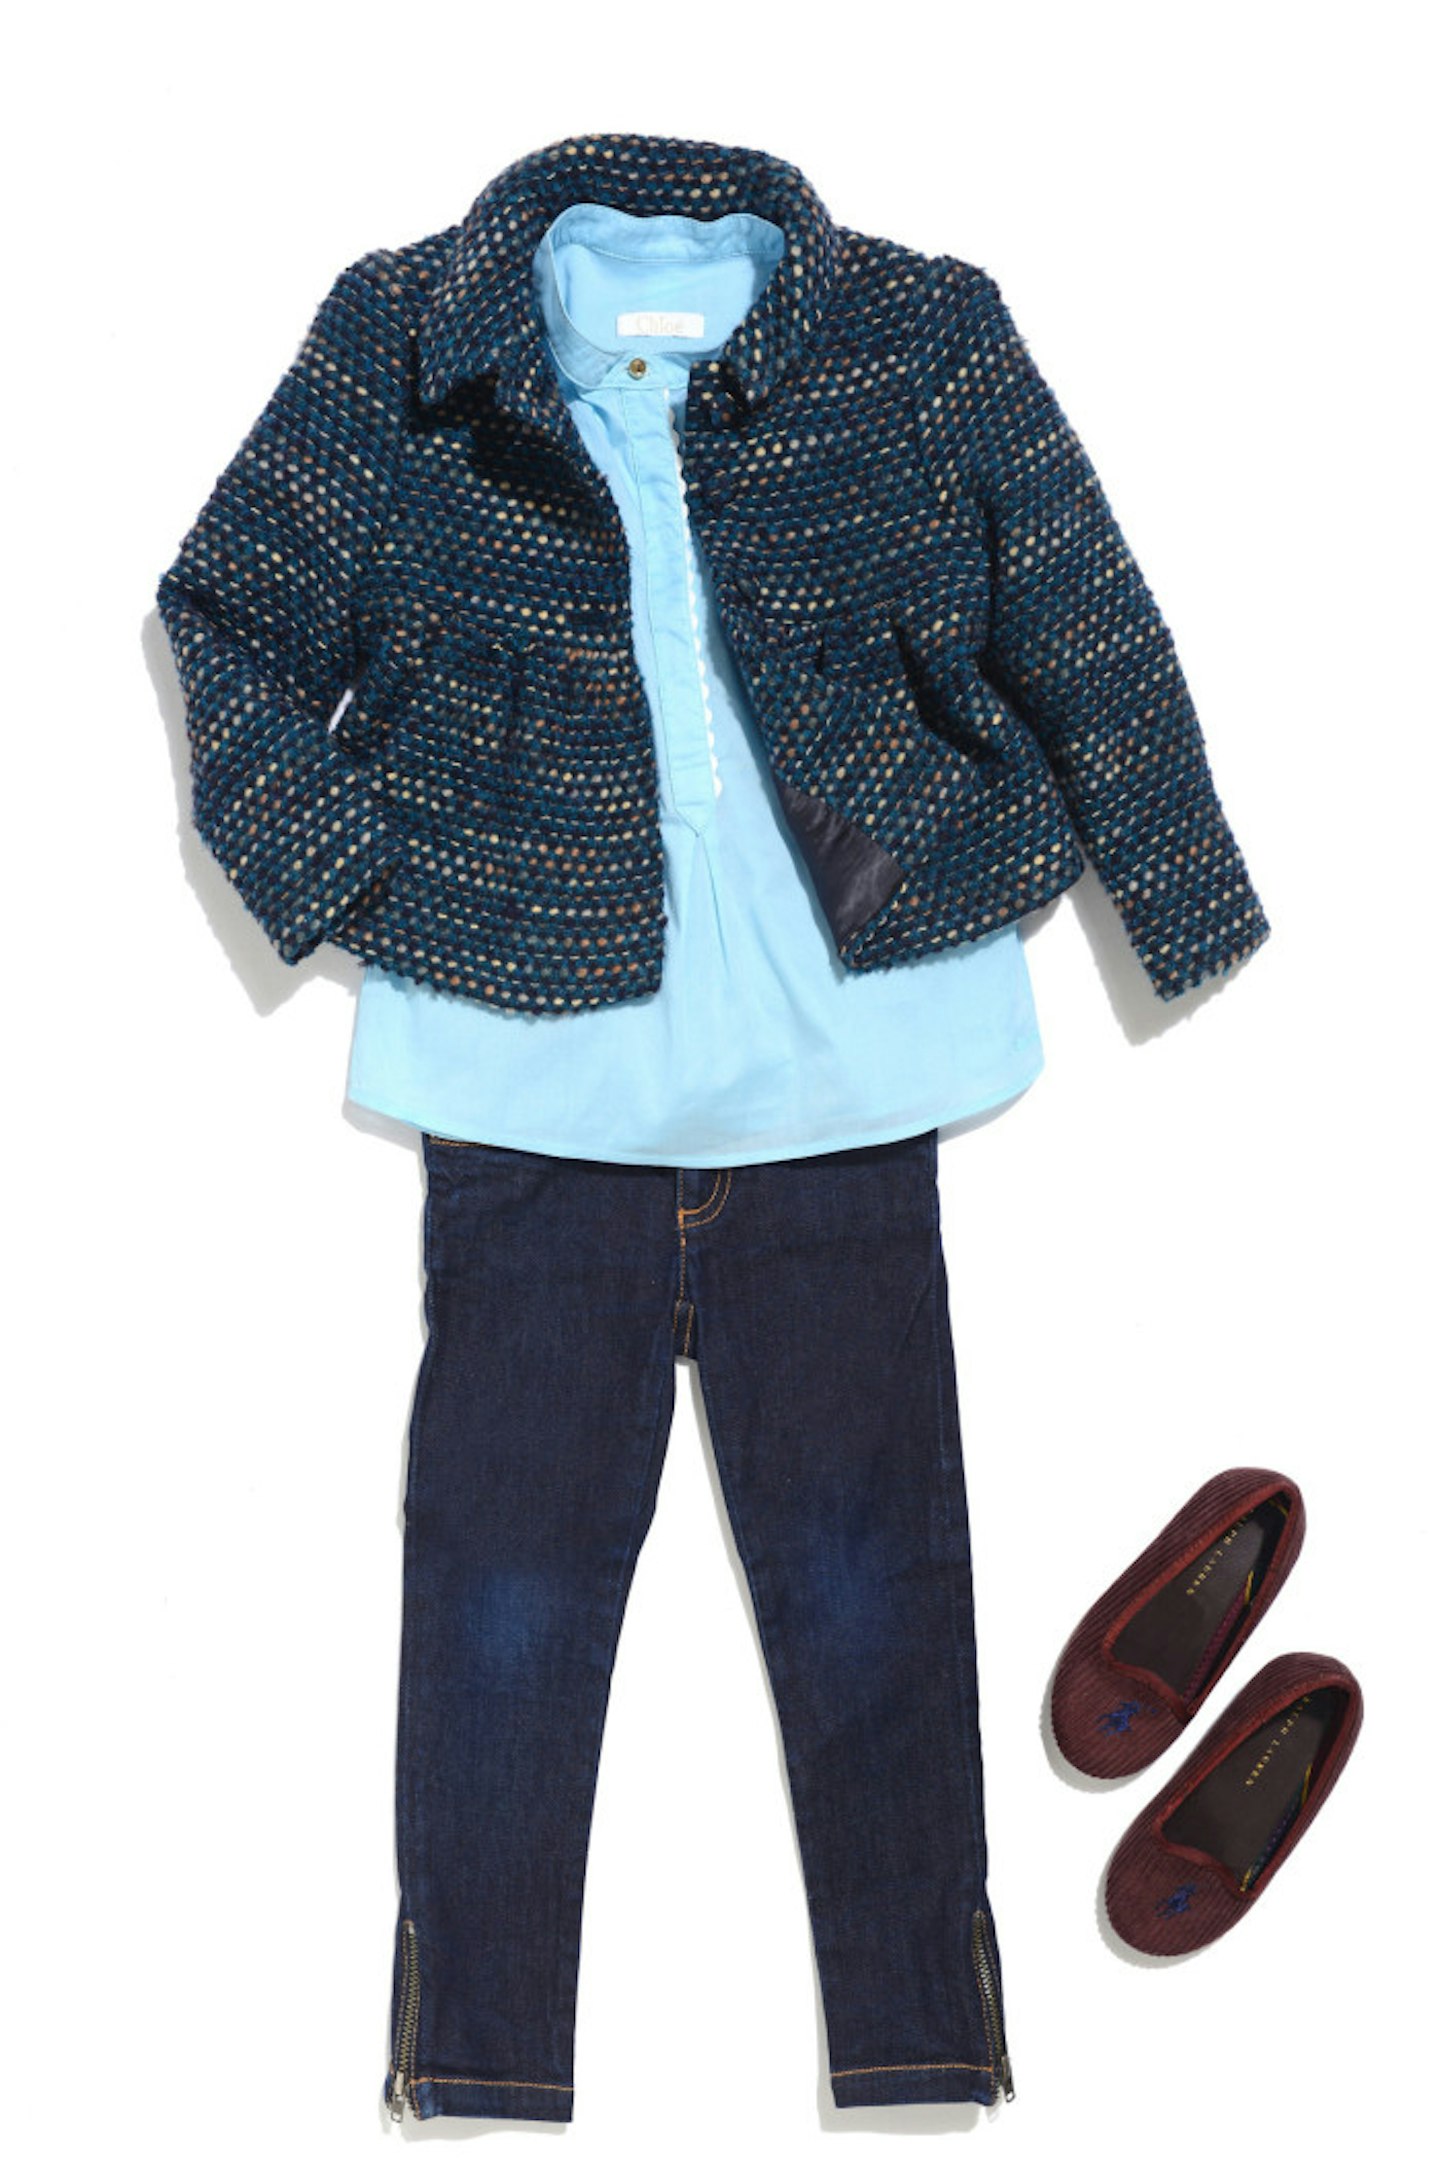 Bonpoint jeans teamed with a Marie Chantal blue jacket, Chloe blue shirt and Ralph Lauren brown pumps